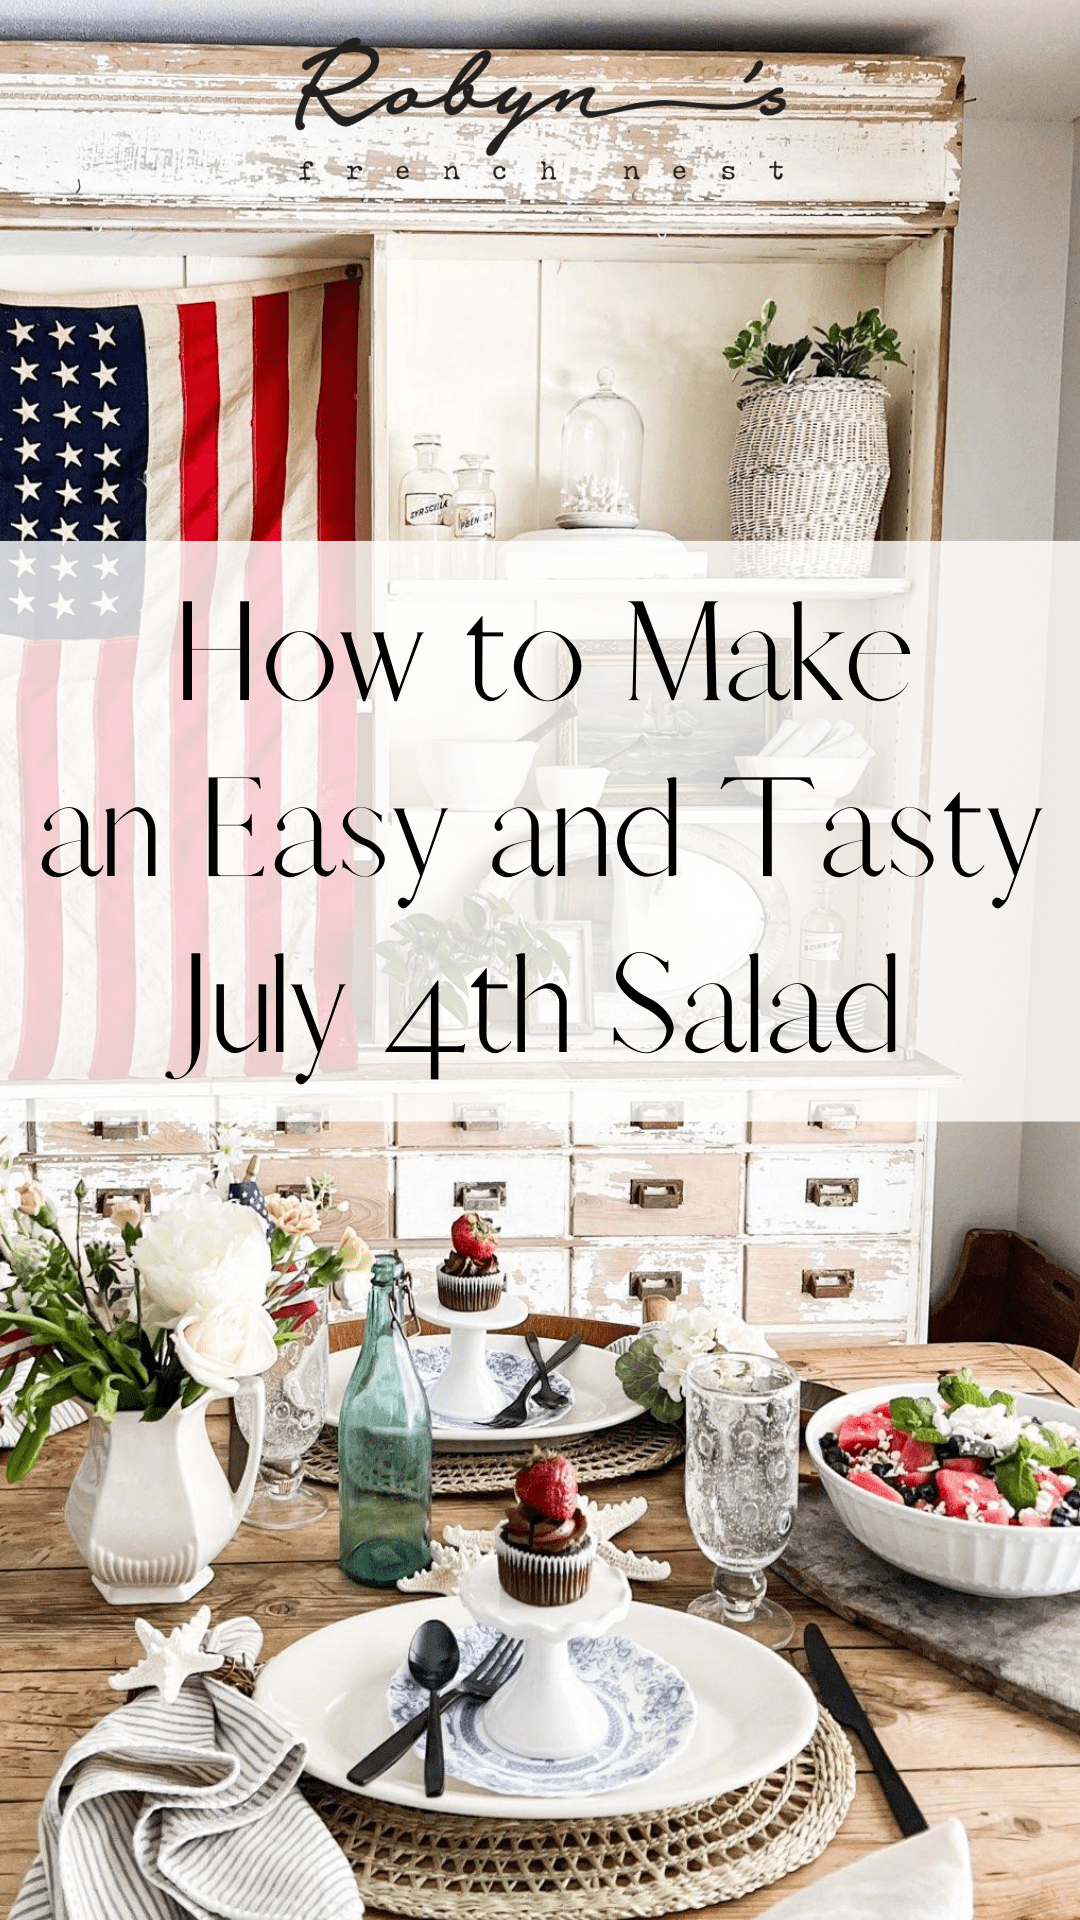 How to Make an Easy and Tasty July 4th Salad